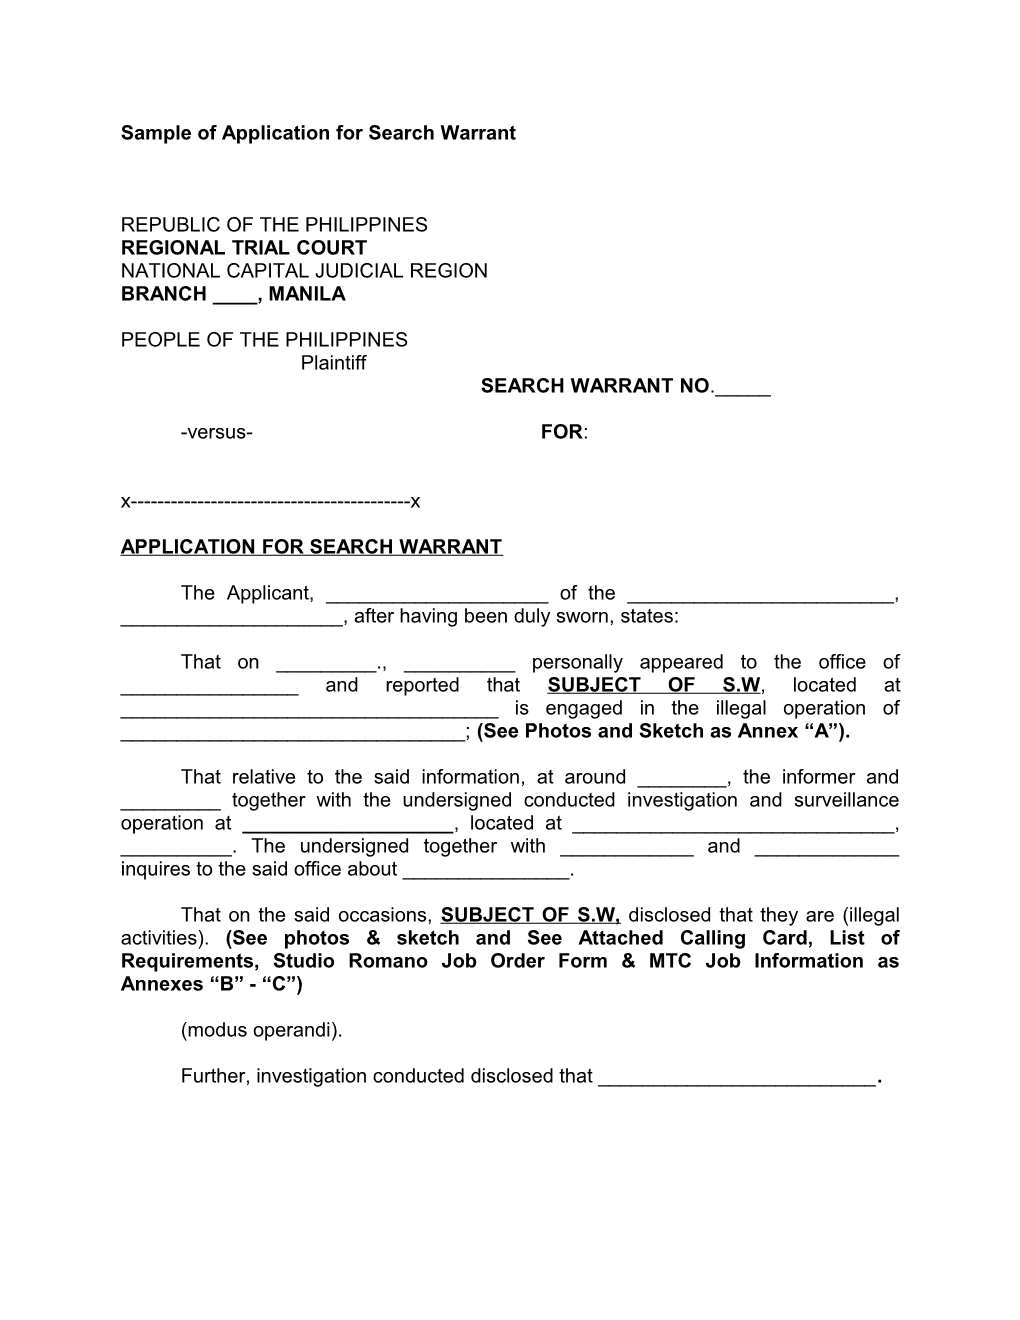 Sample of Application for Search Warrant